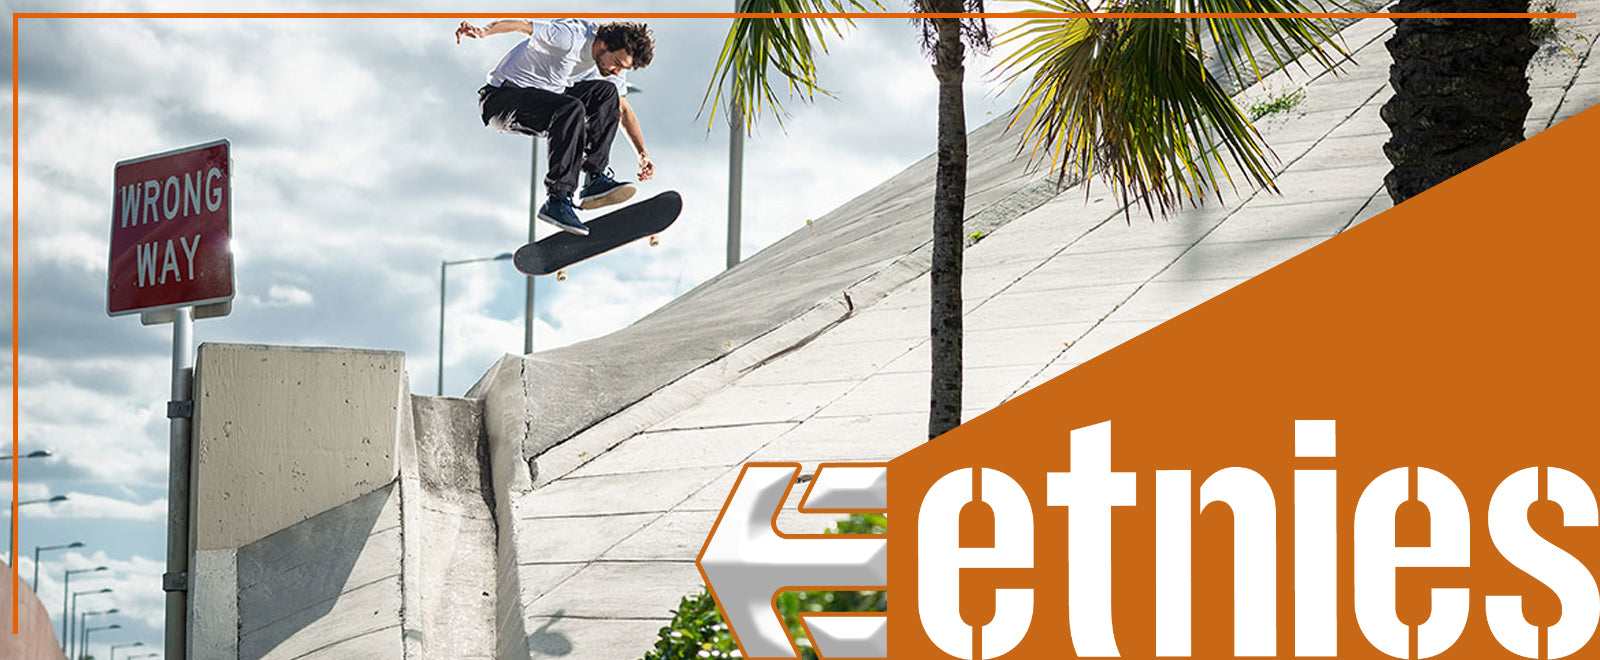 About Etnies Skate Shoes